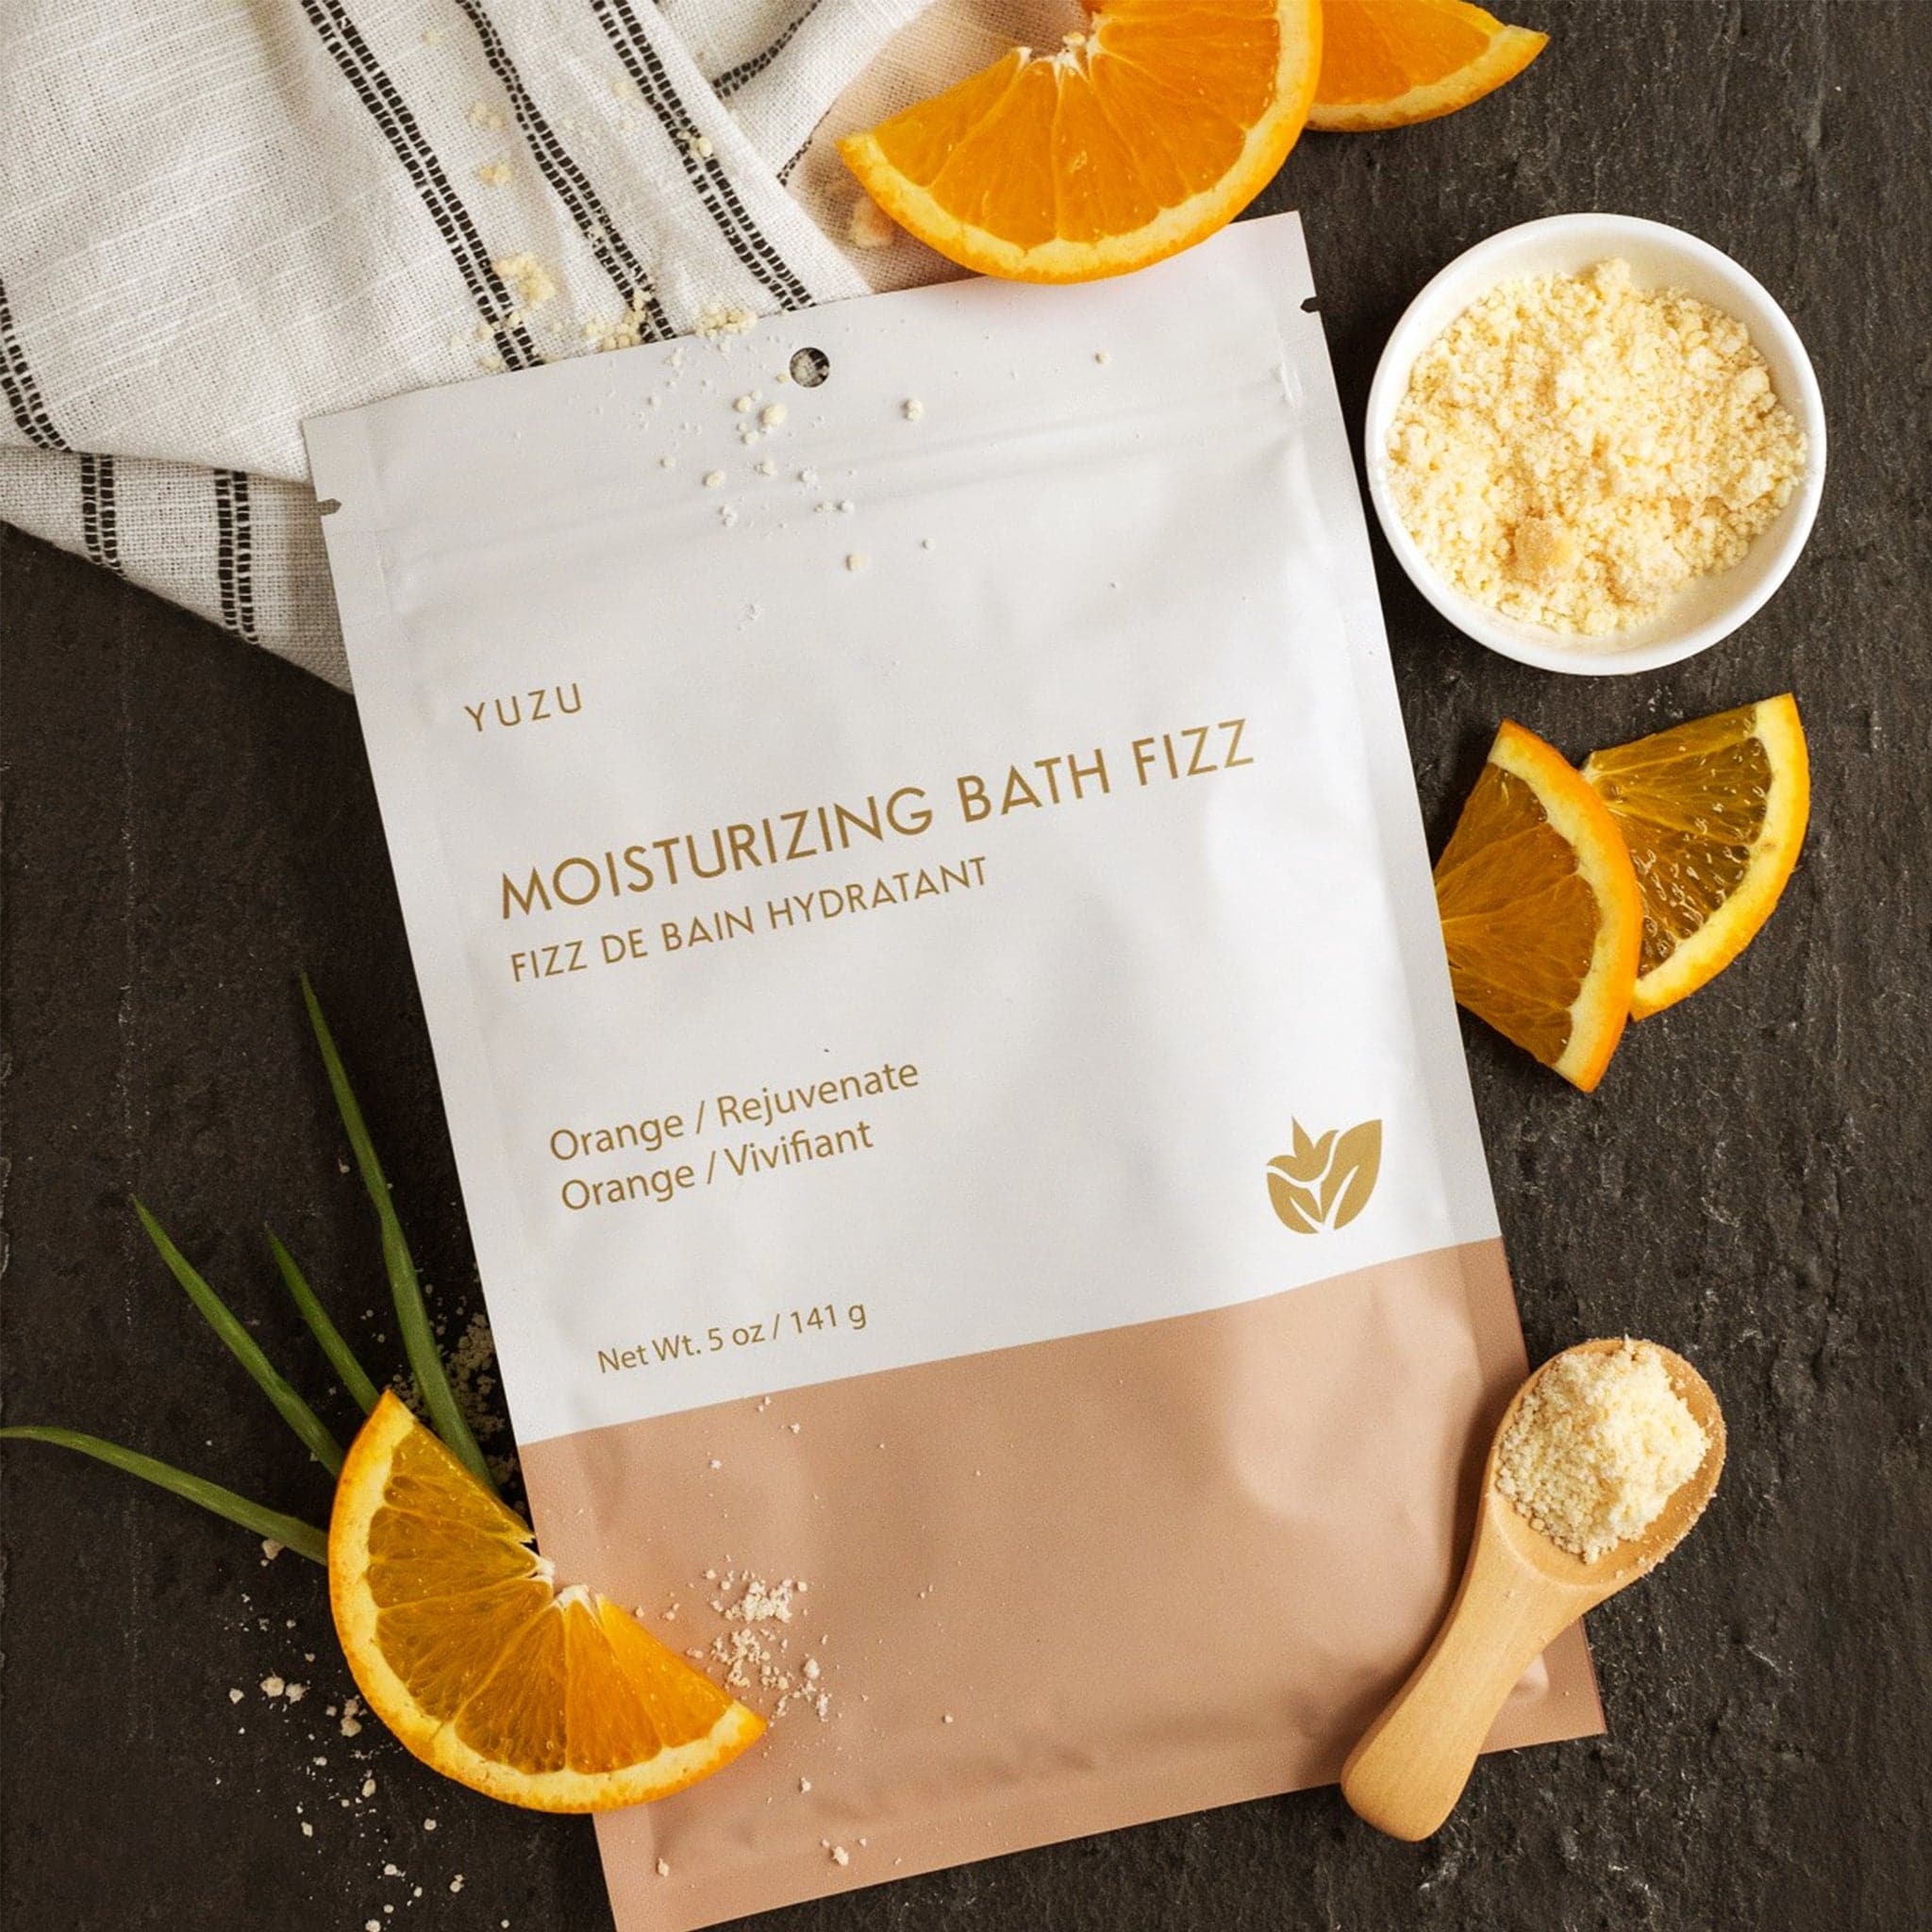 This bath fizz is packaged in a resealable white and pink envelope with gold writing that reads, &quot;Moisturizing Bath Fizz, Orange / Rejuvinate&quot;